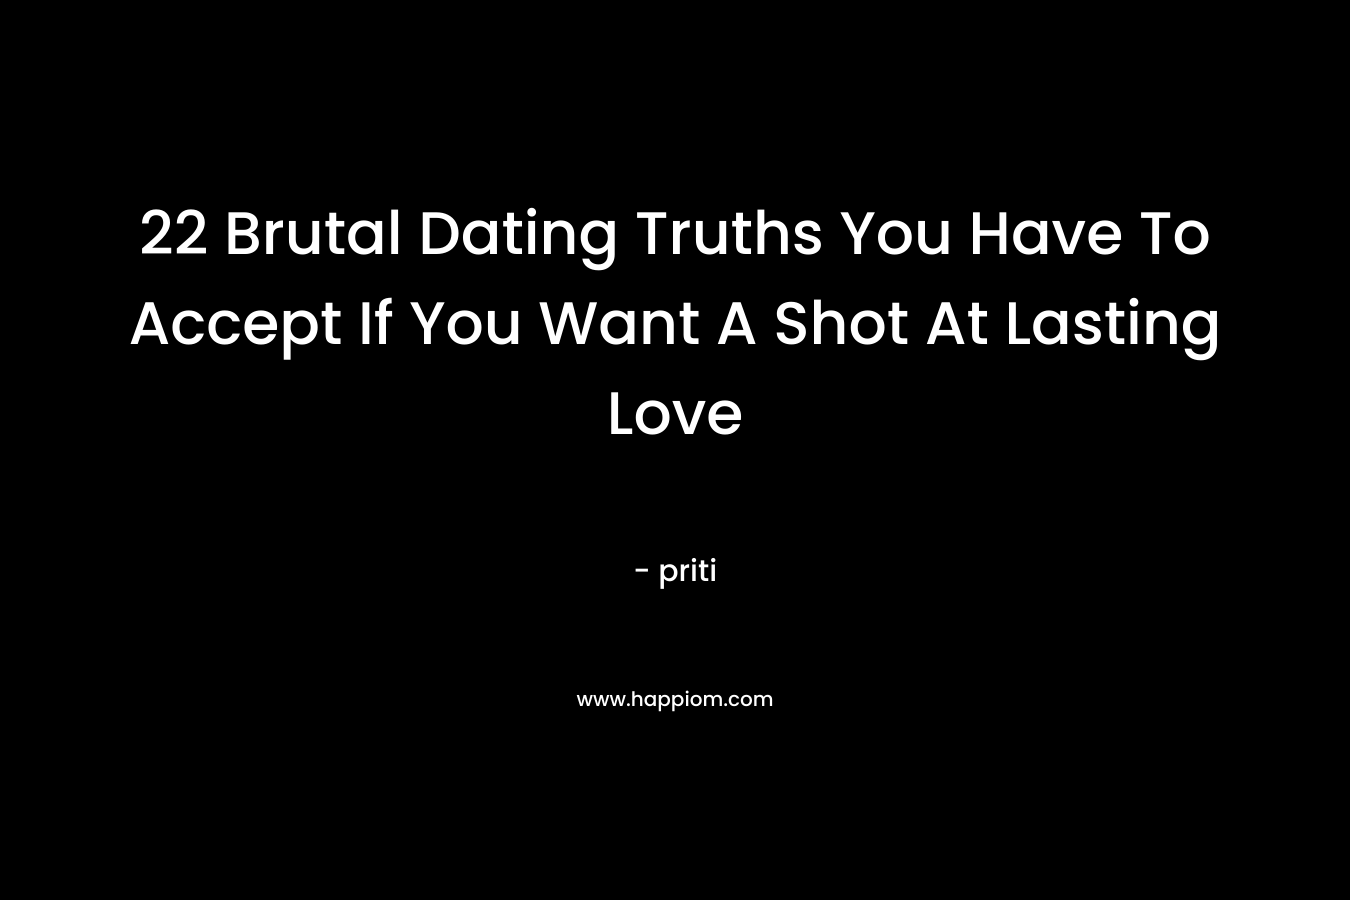 22 Brutal Dating Truths You Have To Accept If You Want A Shot At Lasting Love – priti